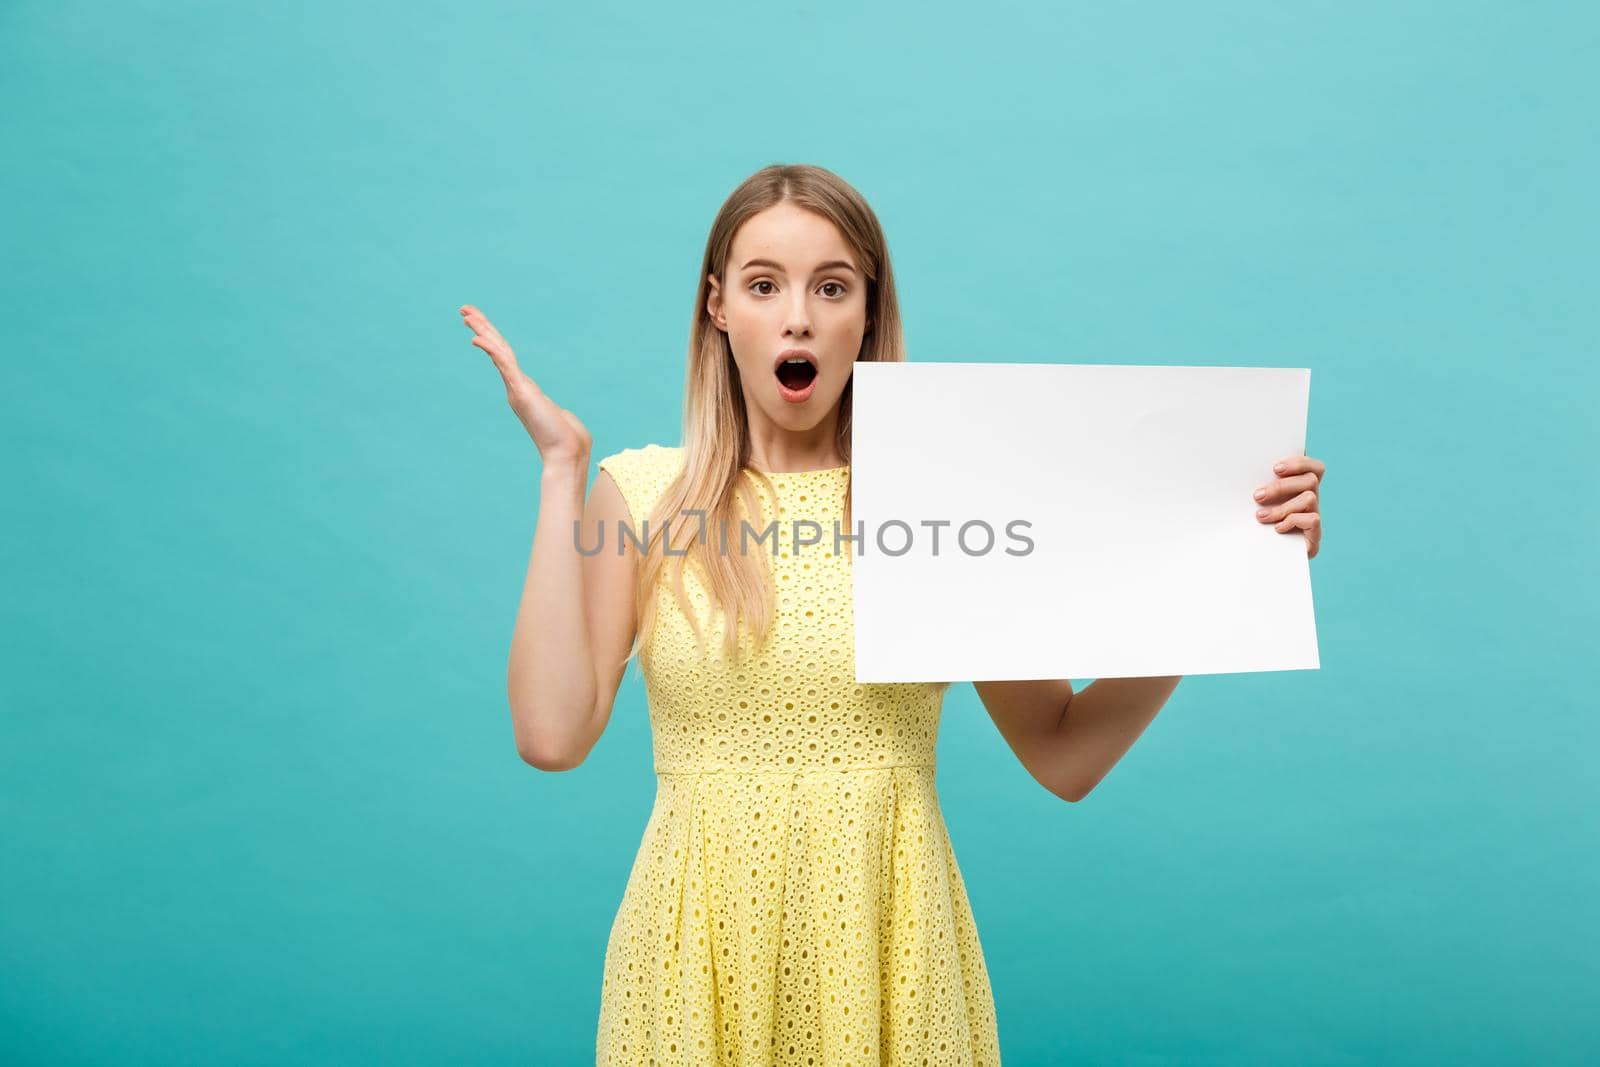 Closeup portrait, young woman in yellow dress holding white plain paper with shocked expression at what she sees, isolated blue background